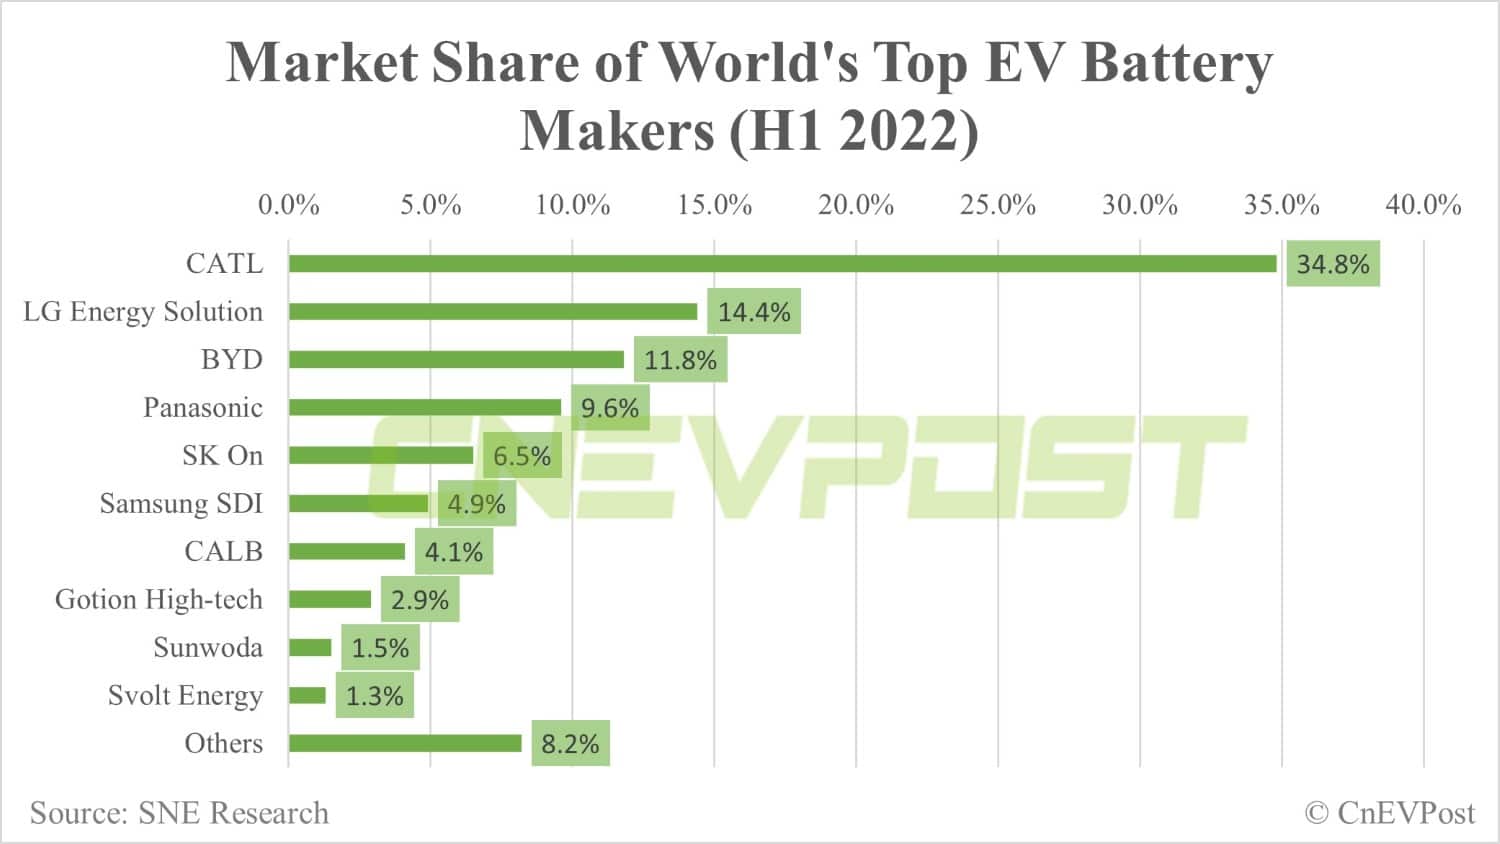 CATL holds 34.8% of global power battery market share in H1-CnEVPost